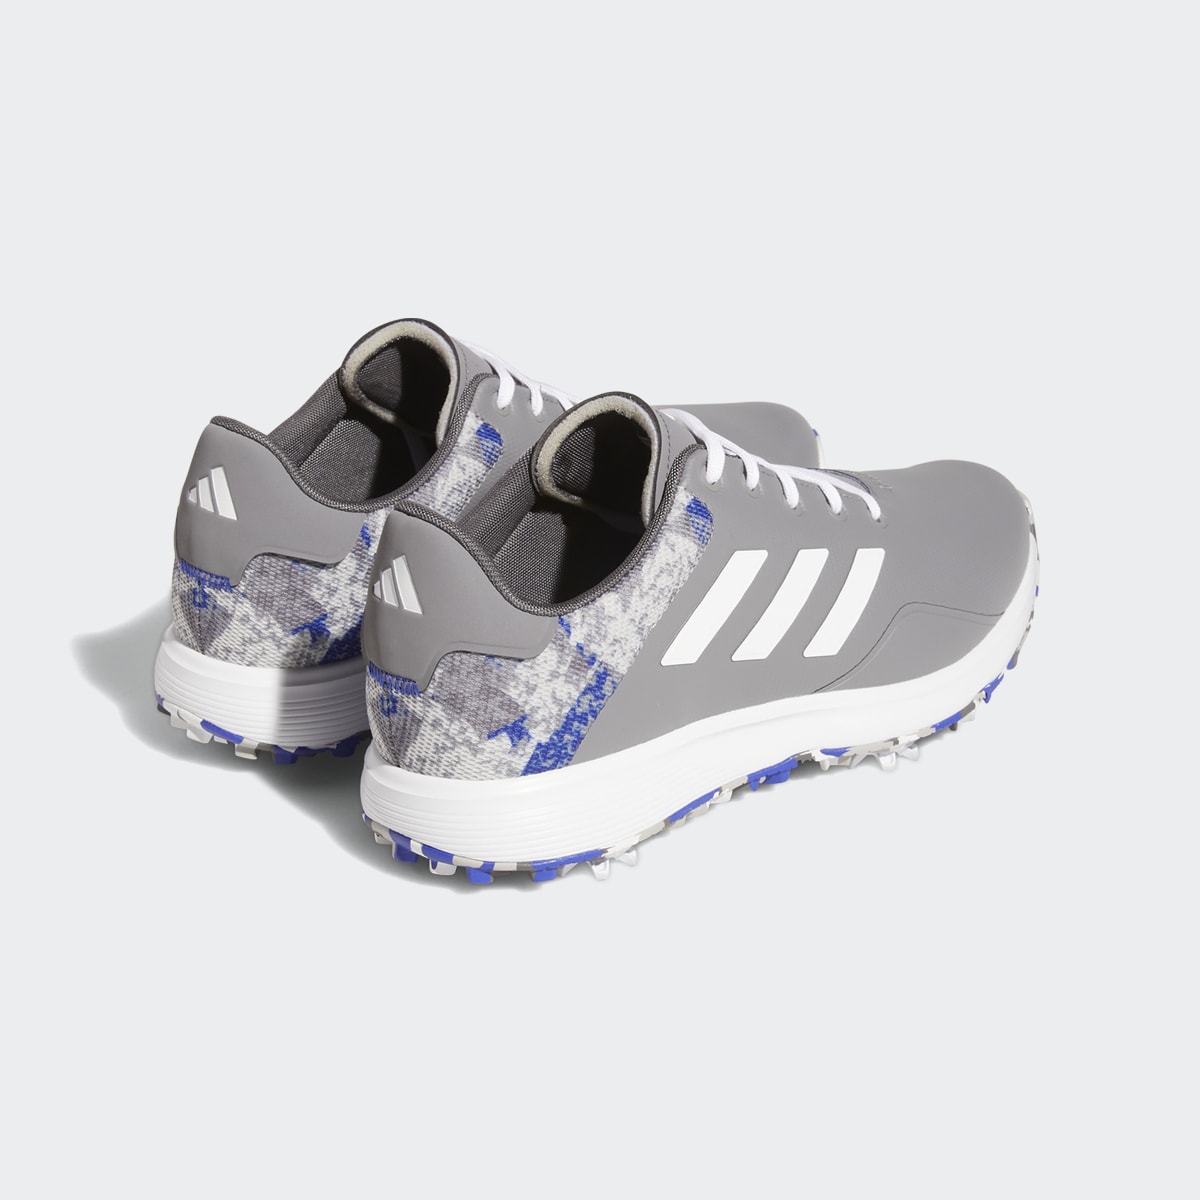 Adidas S2G Shoes. 5